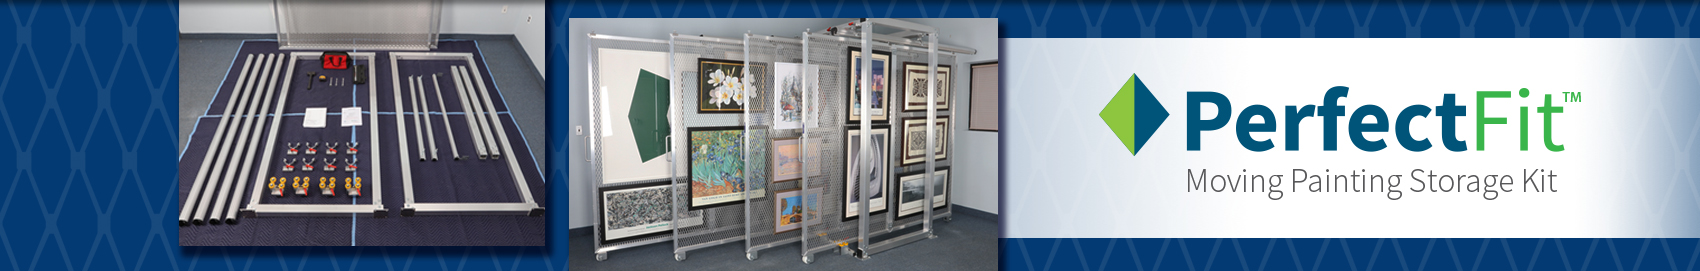 PerfectFit™ Painting Storage Kit Systems – Crystalizations Systems, Inc.  (CSI)